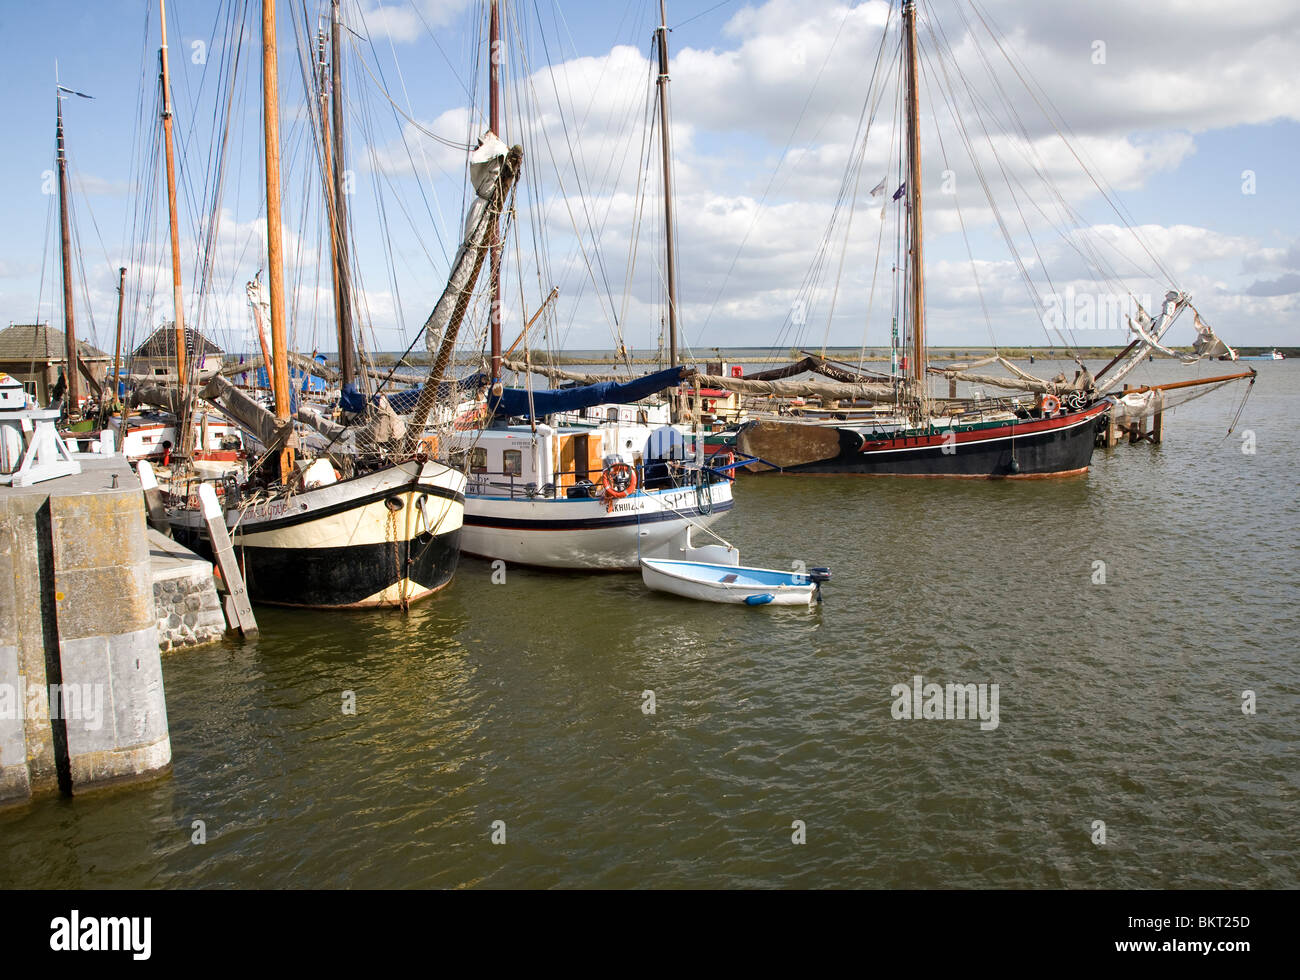 Boats in the outer harbour, Enkhuizen, Netherlands Stock Photo